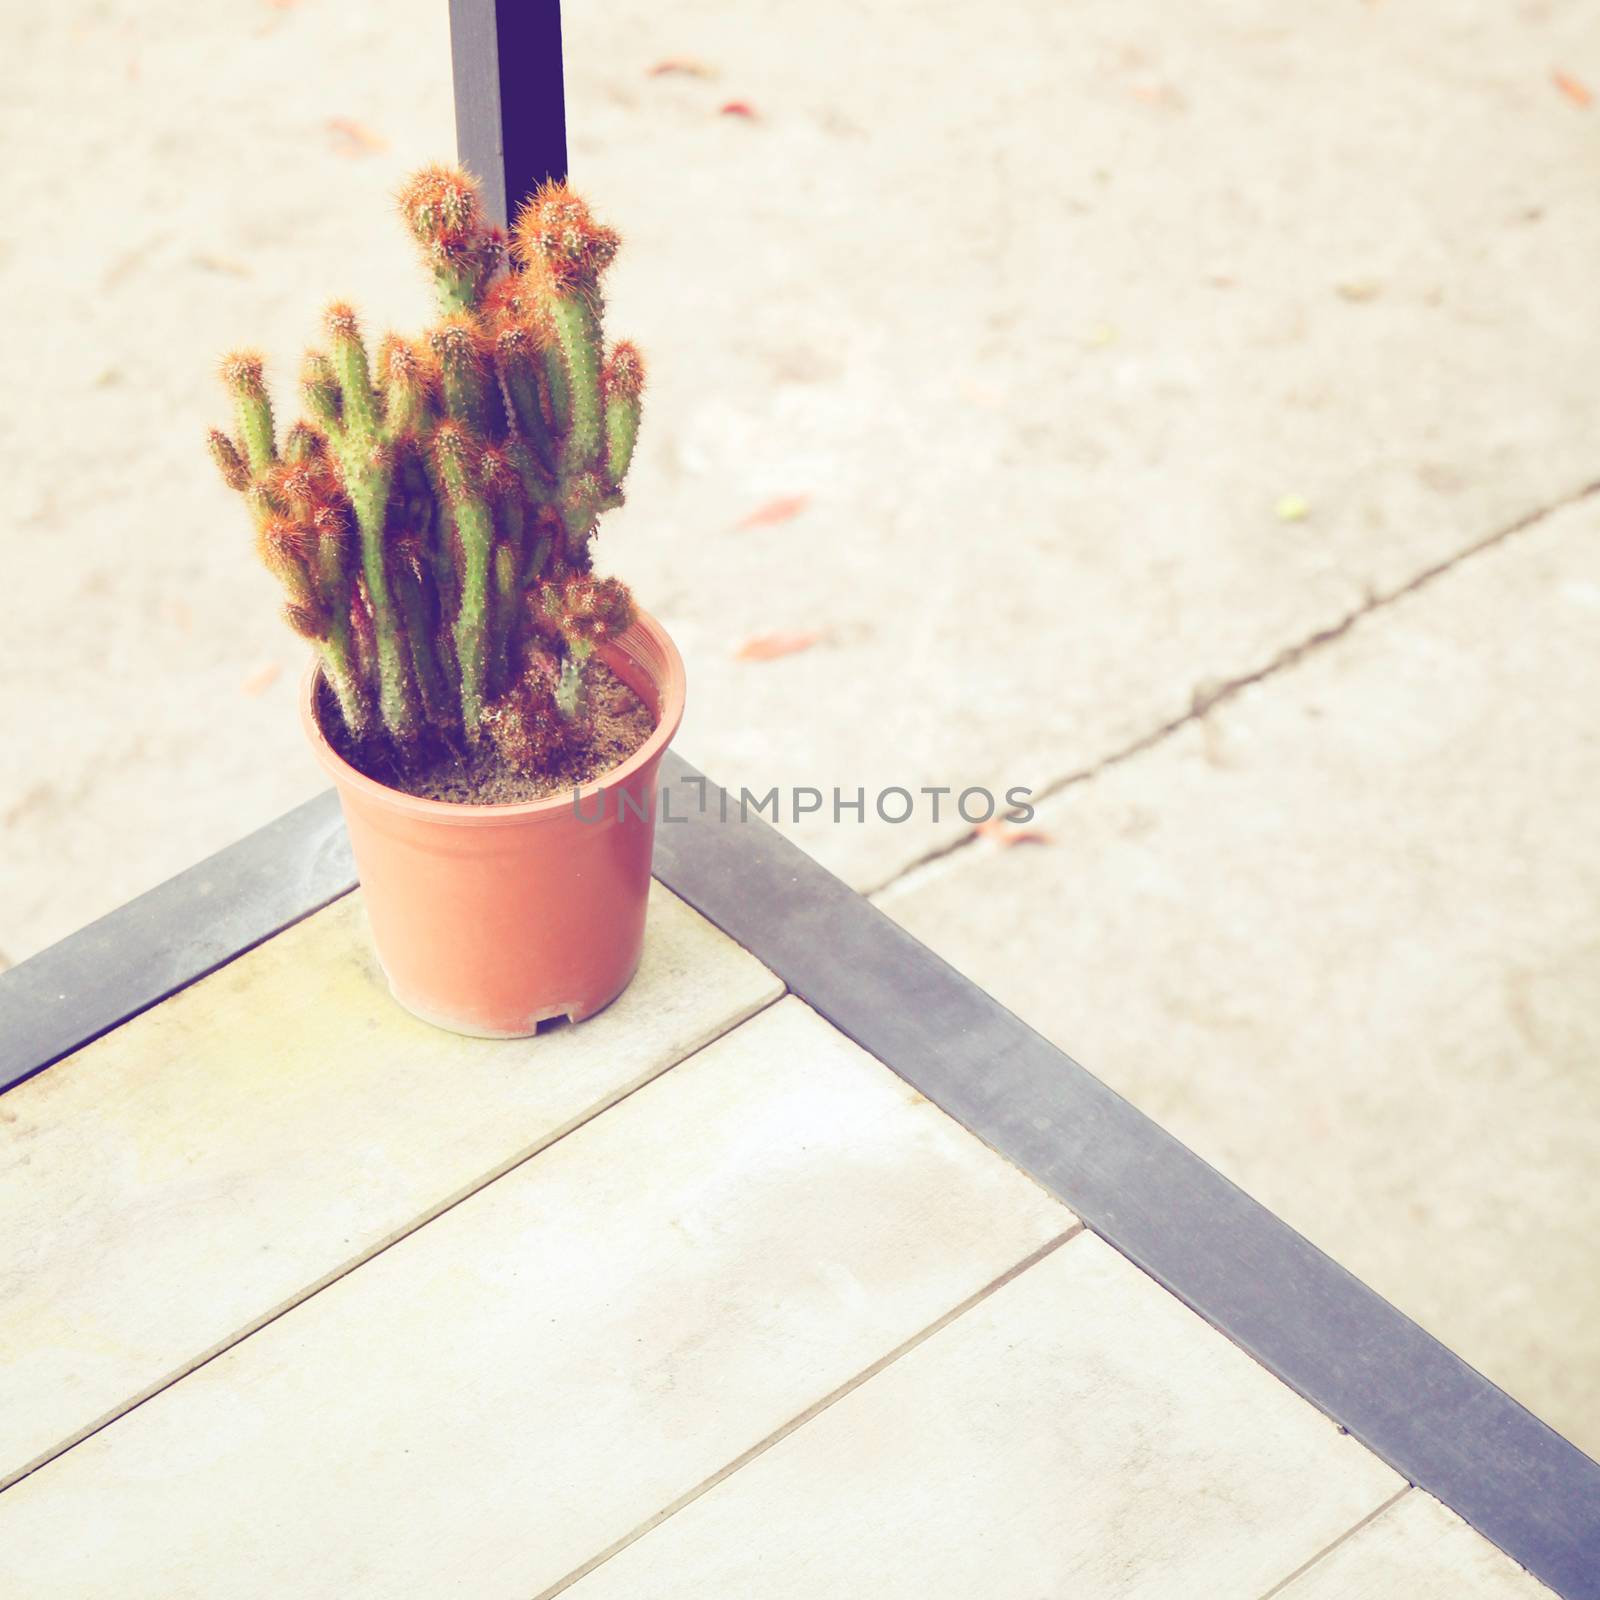 Small cactus plant in flower pot with retro filter effect by nuchylee